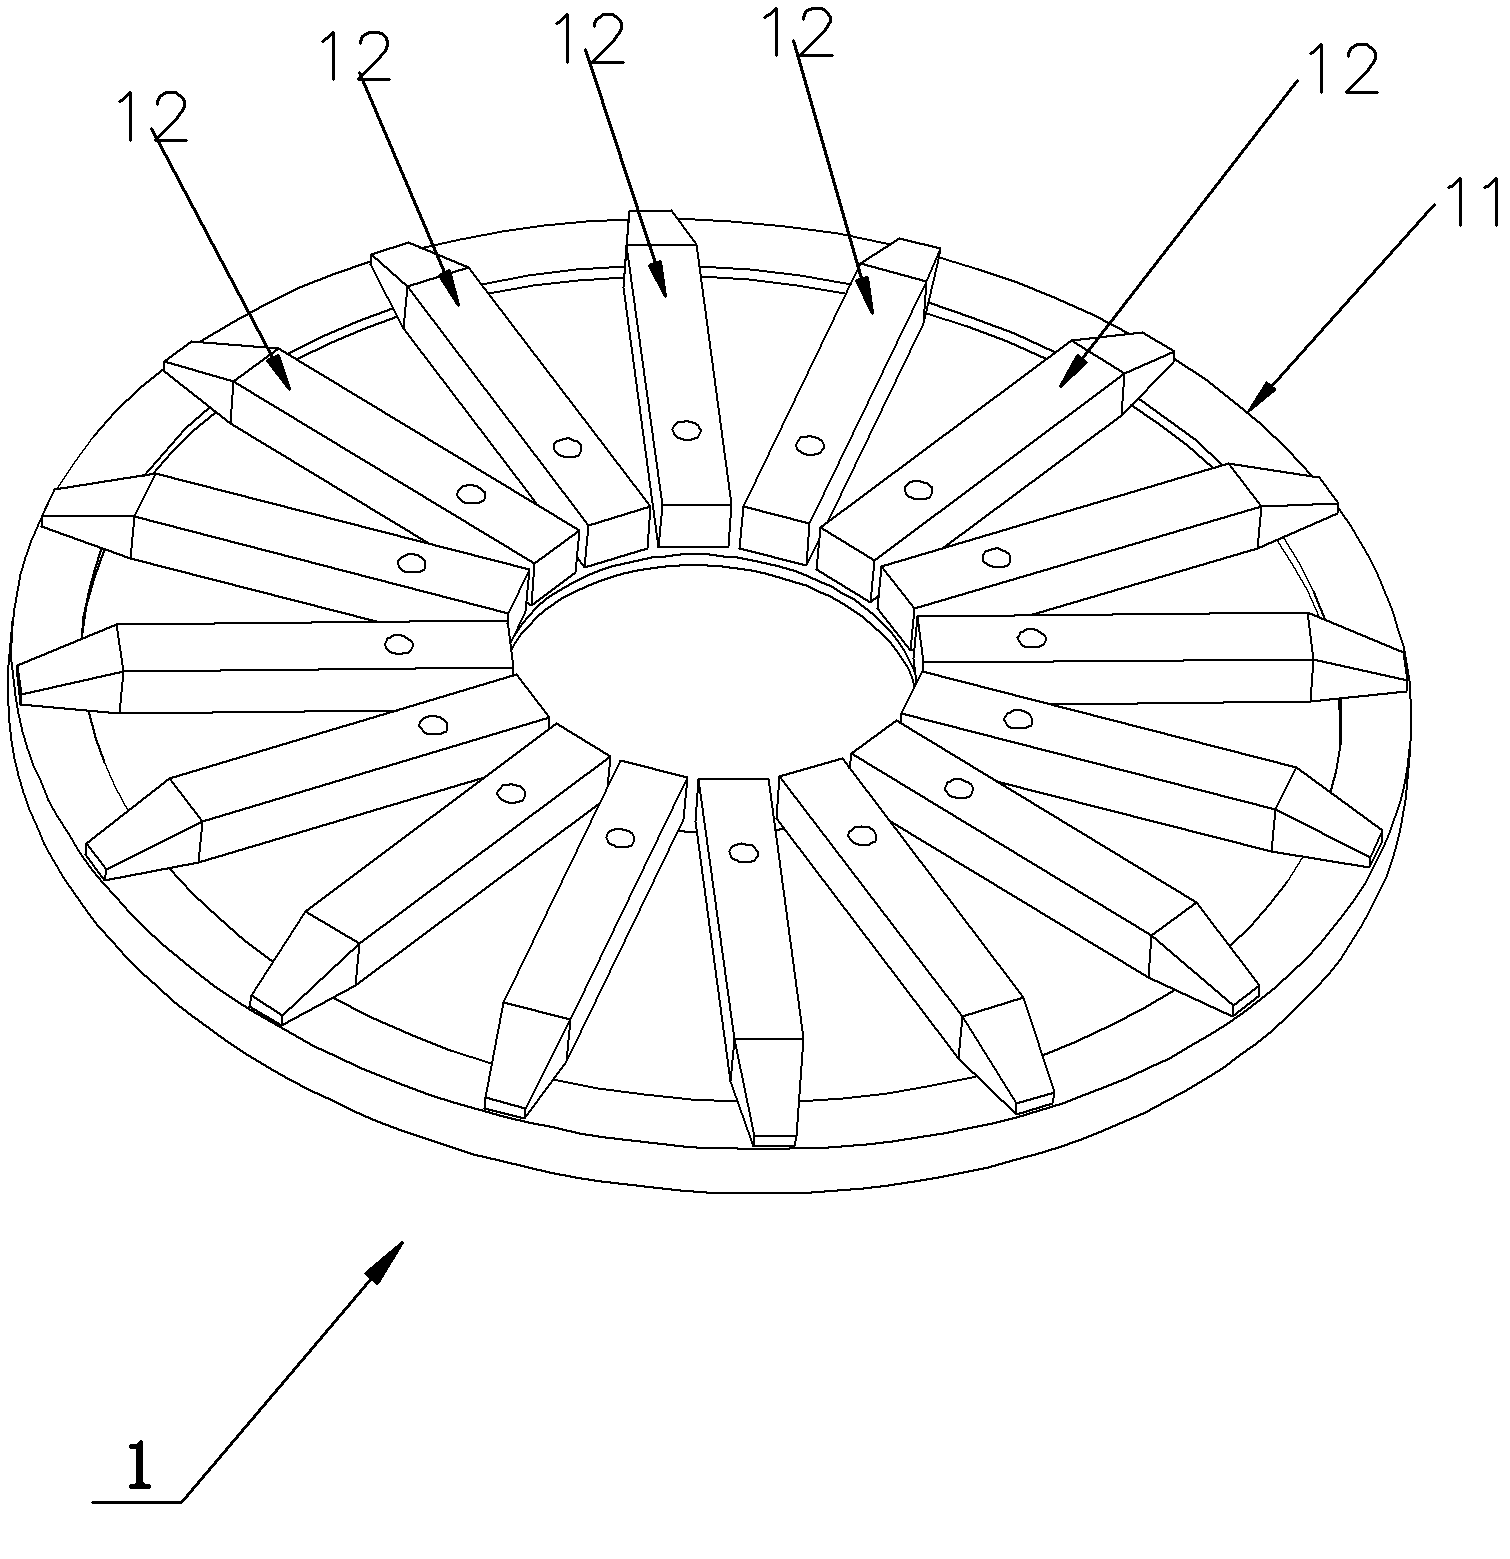 Full-automatic LED (light-emmiting diode) light bar processing device